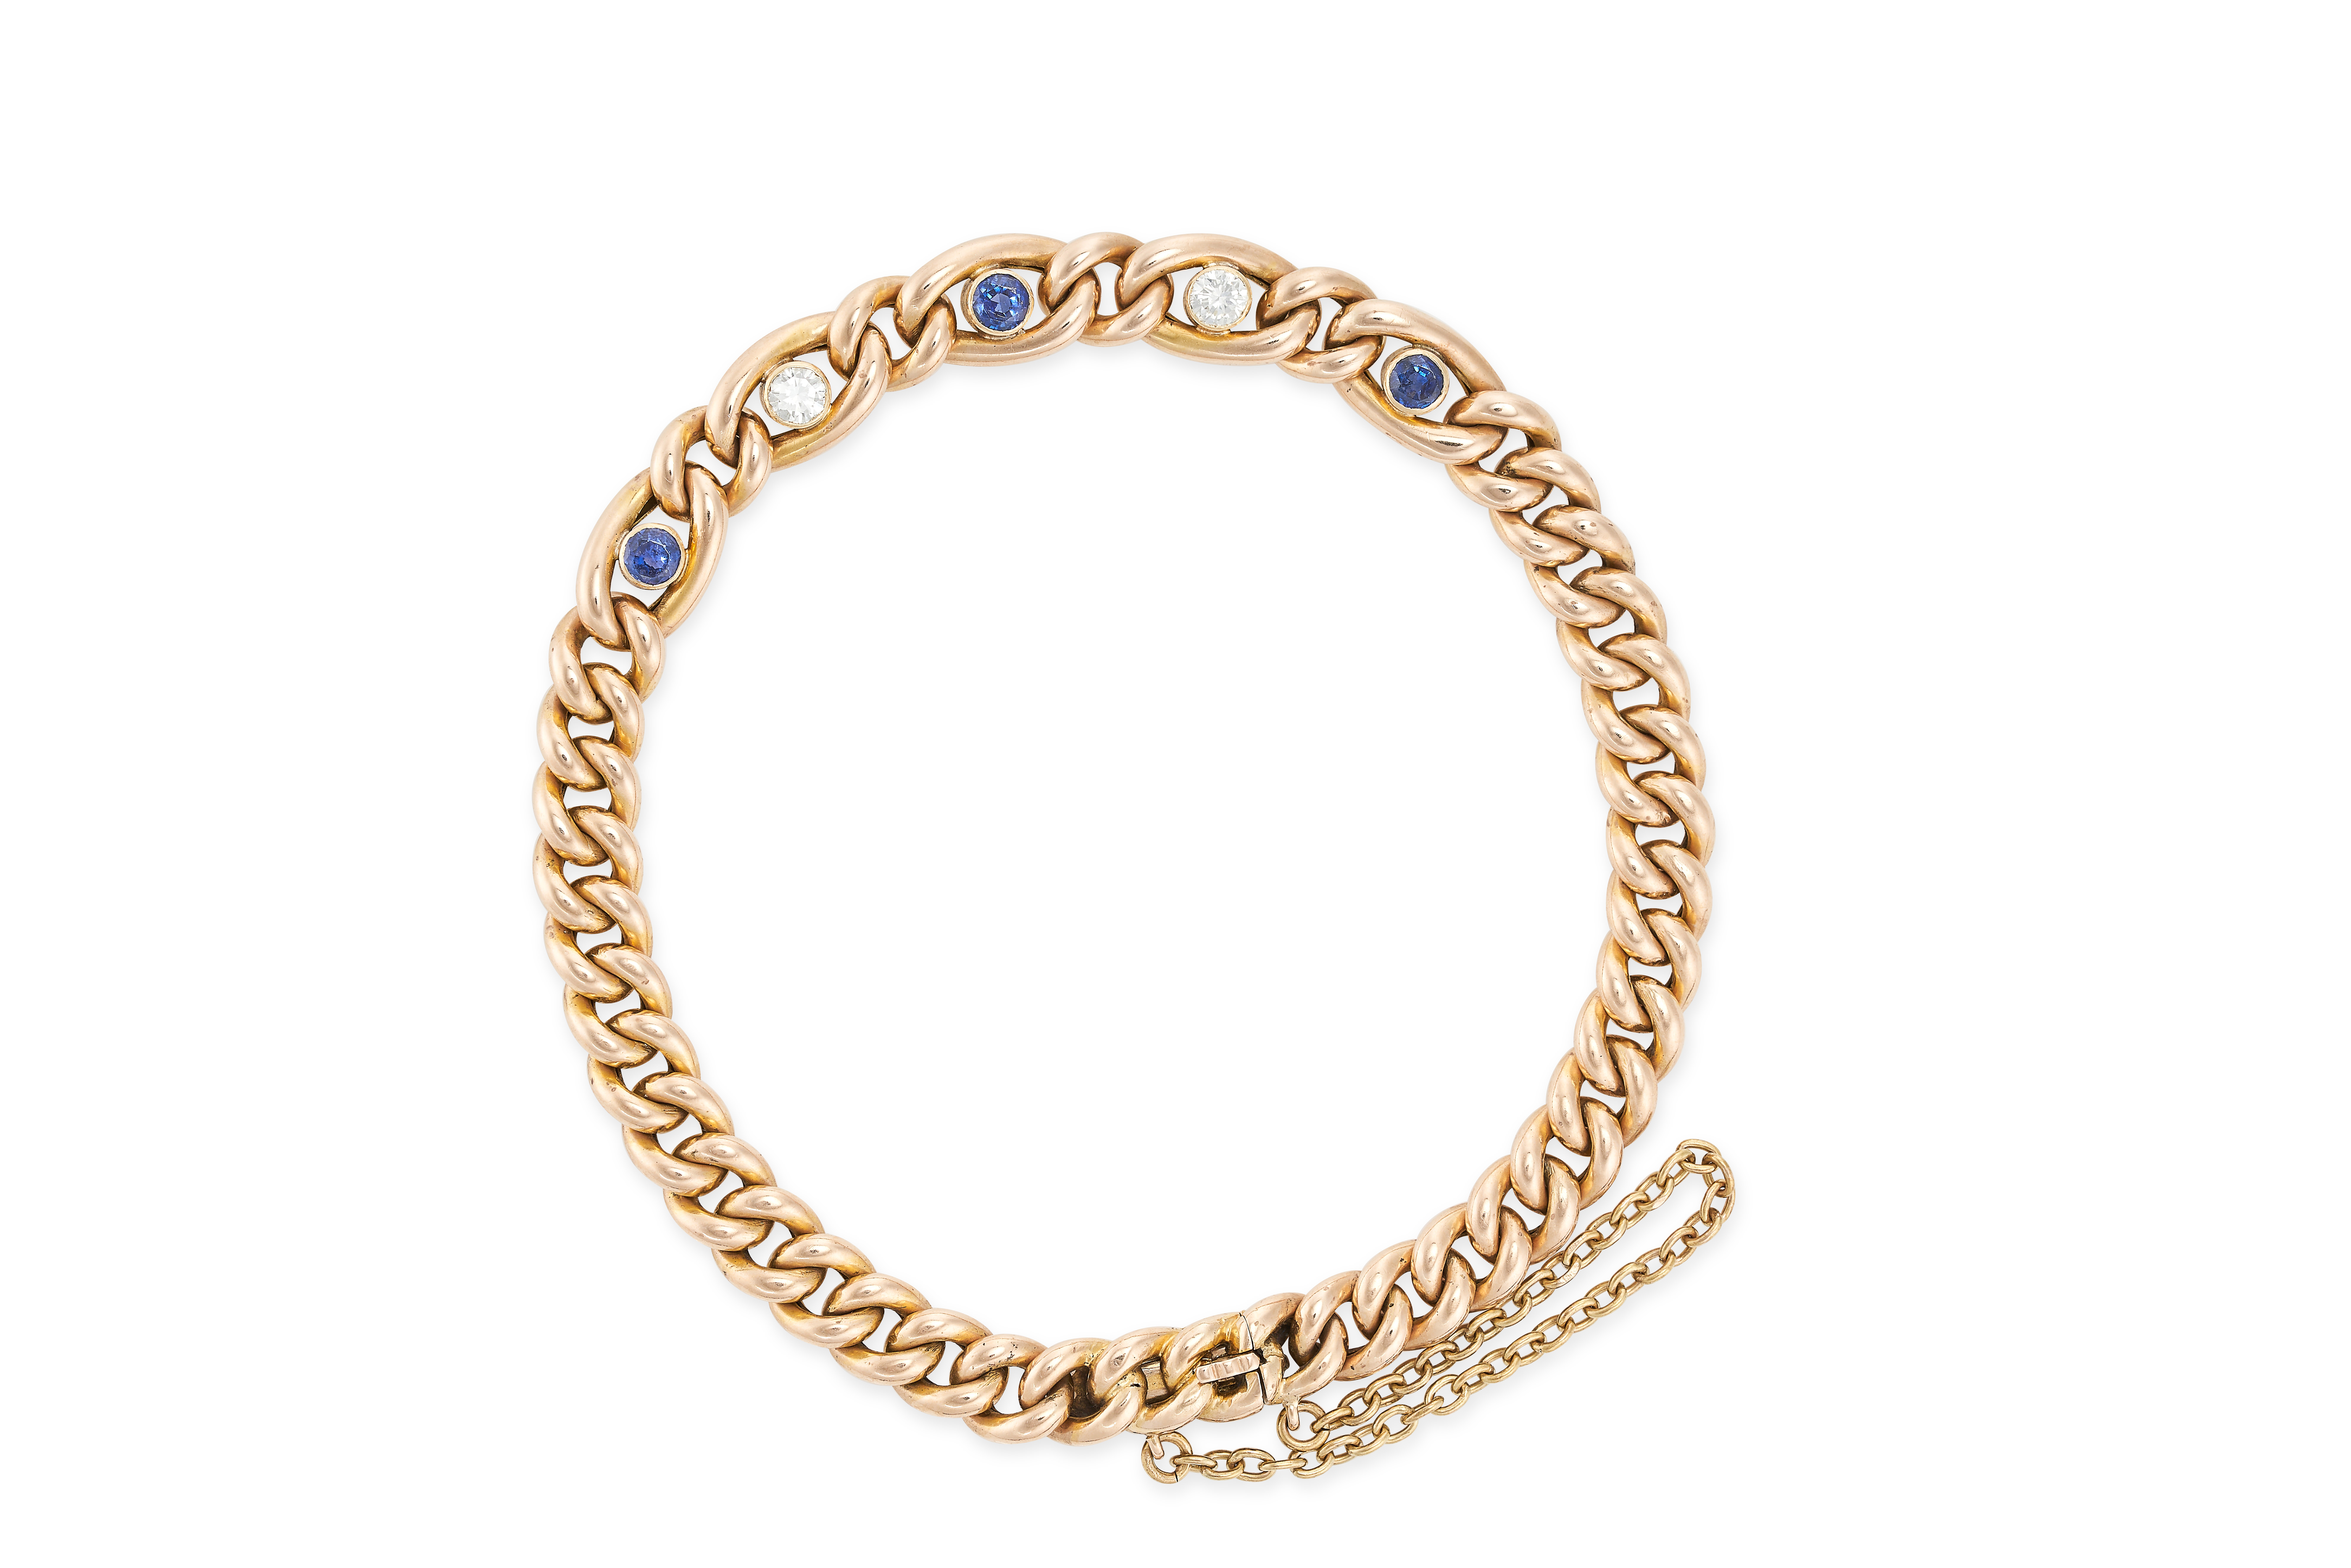 A VINTAGE SAPPHIRE AND DIAMOND BRACELET, CIRCA 1930 in 15ct yellow gold, comprising a curb link